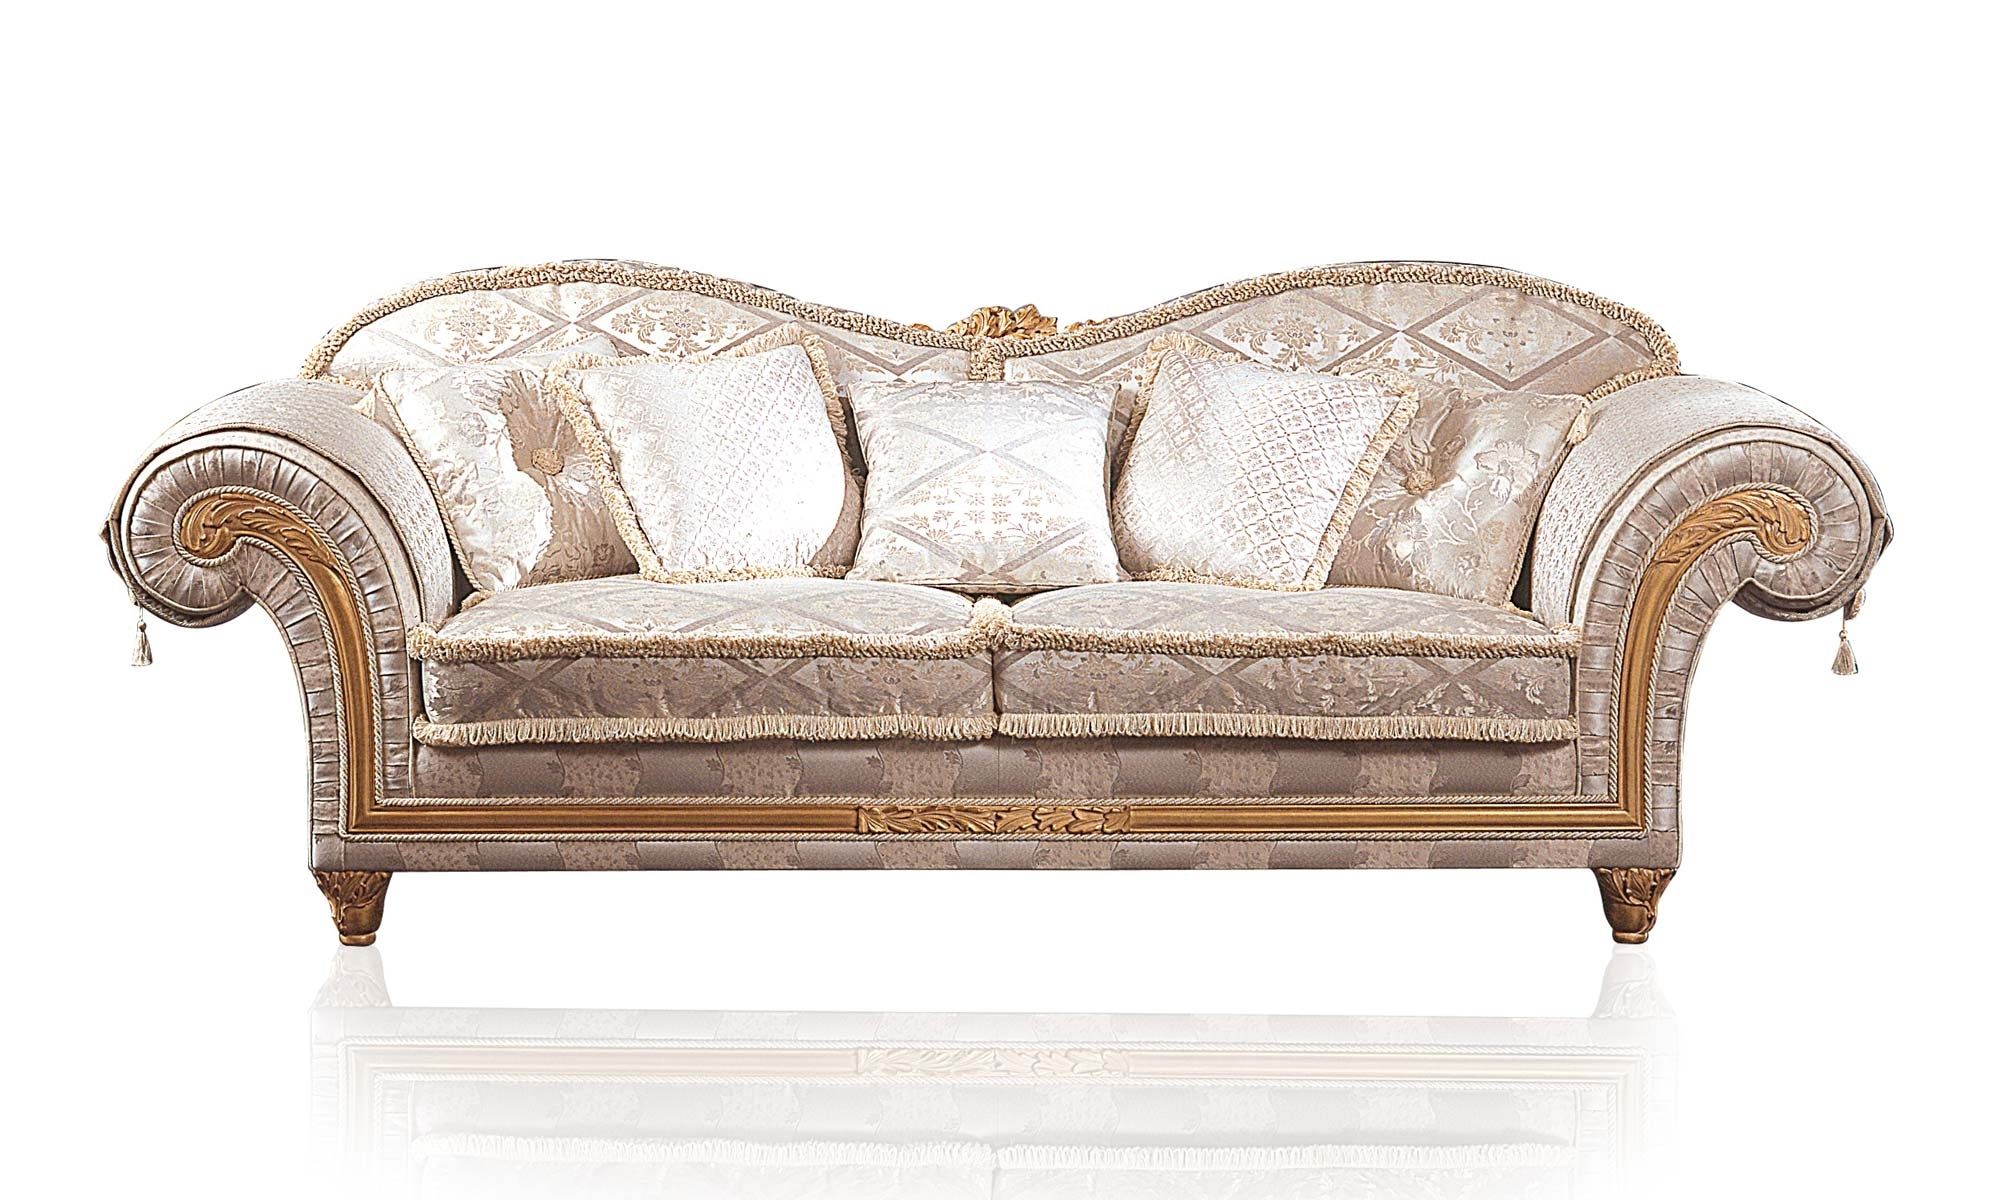 Classic Sofa Excelsior | Vimercati Classic Furniture Within Classic Sofas (View 1 of 10)